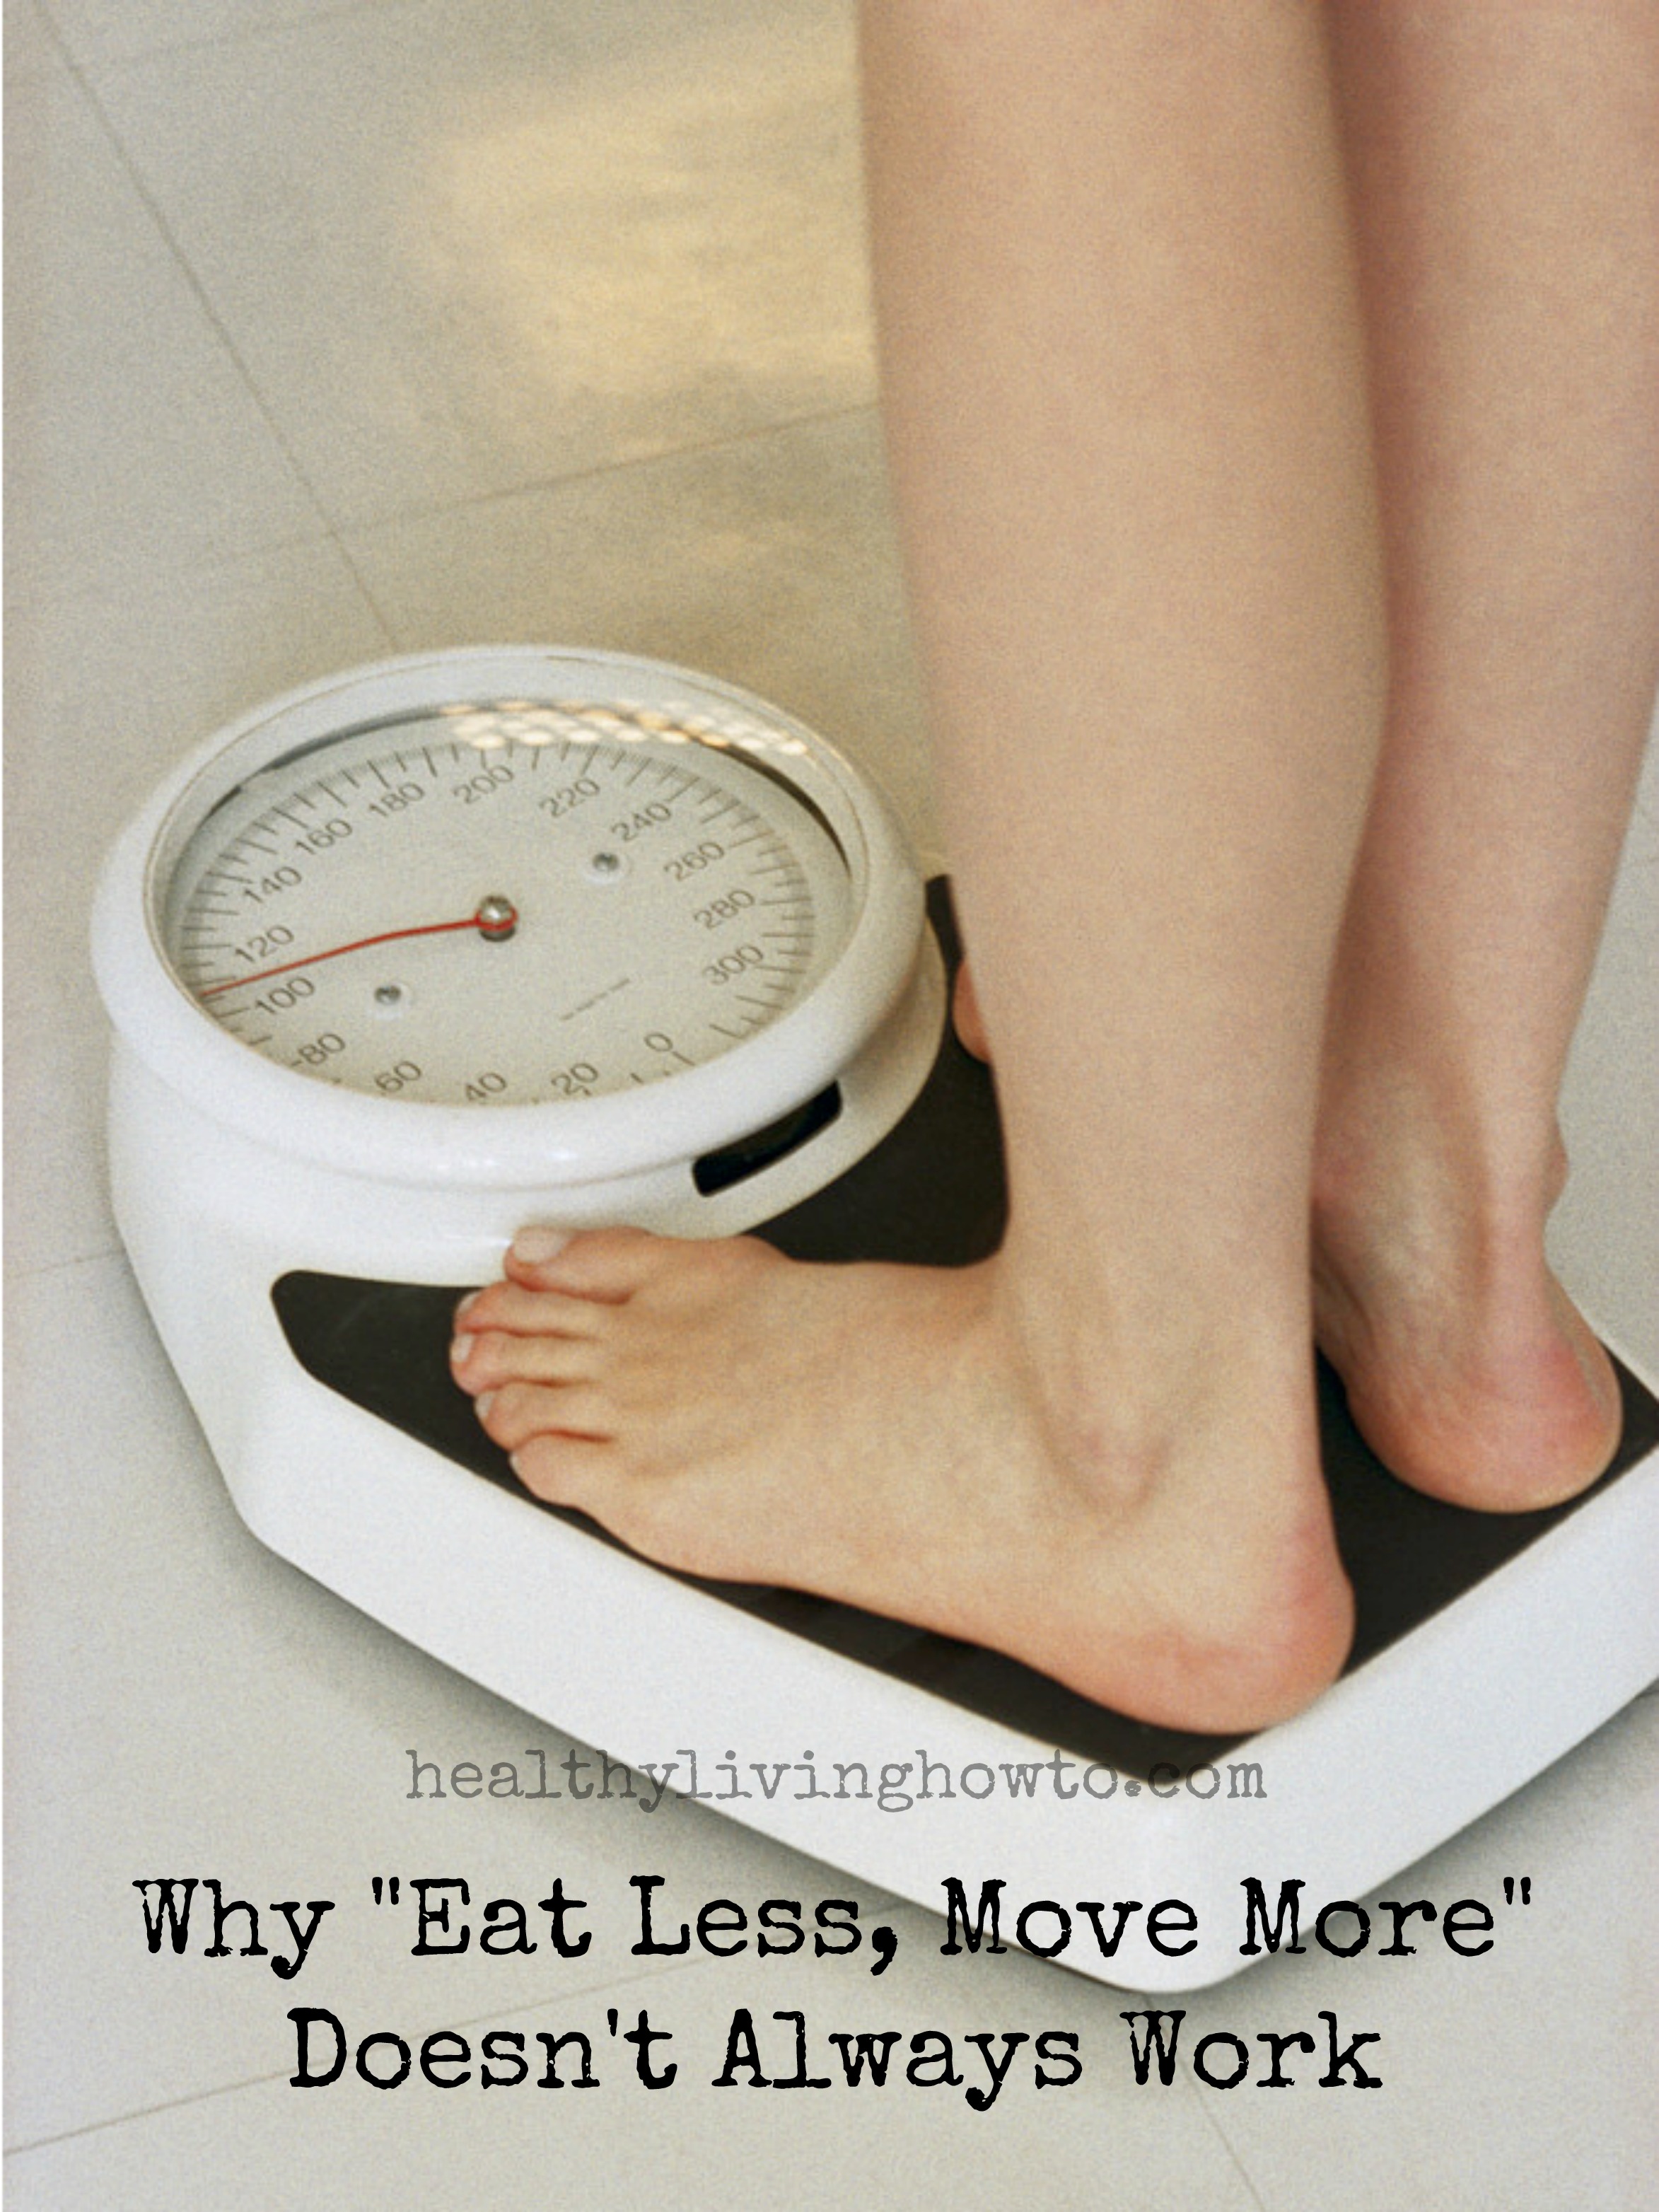 Why "Eat Less, Move More" Doesn't Always Work